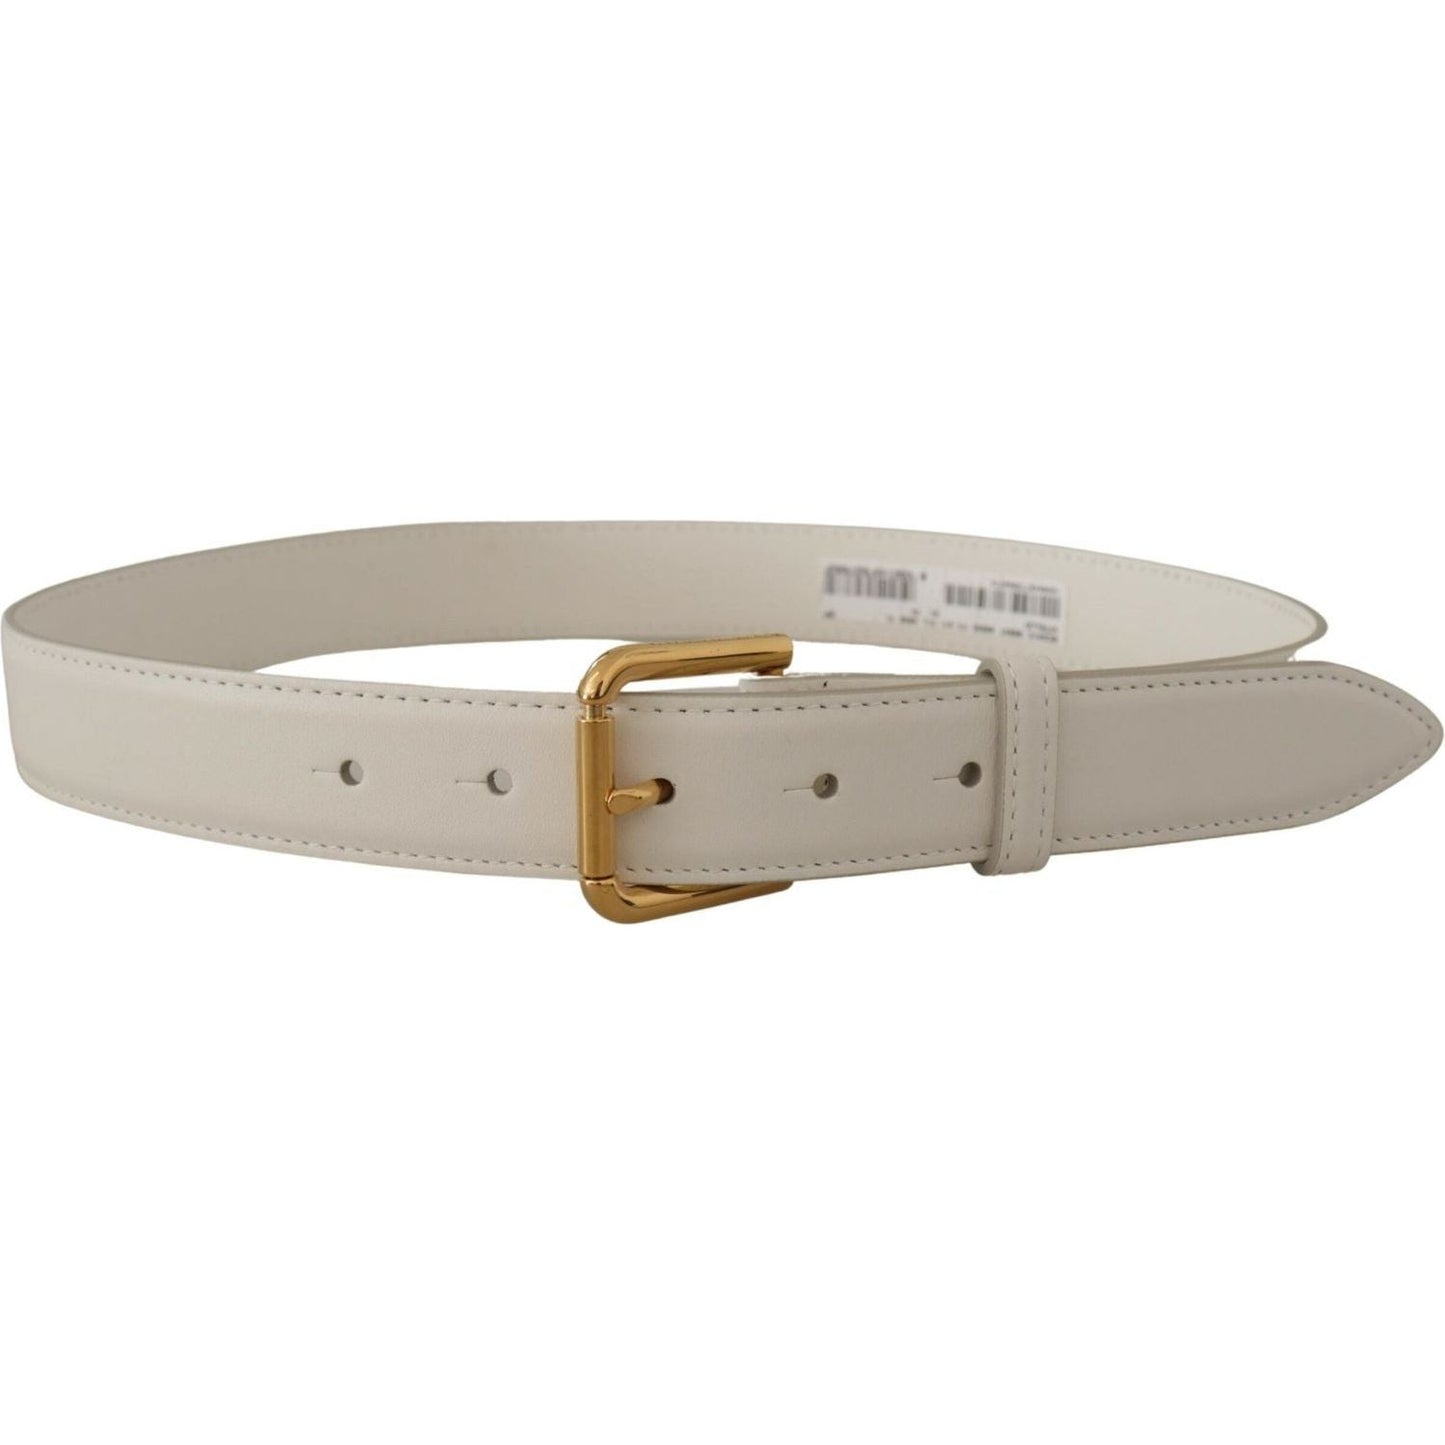 Dolce & Gabbana Chic White Leather Belt with Gold Engraved Buckle white-calf-leather-gold-tone-logo-metal-buckle-belt